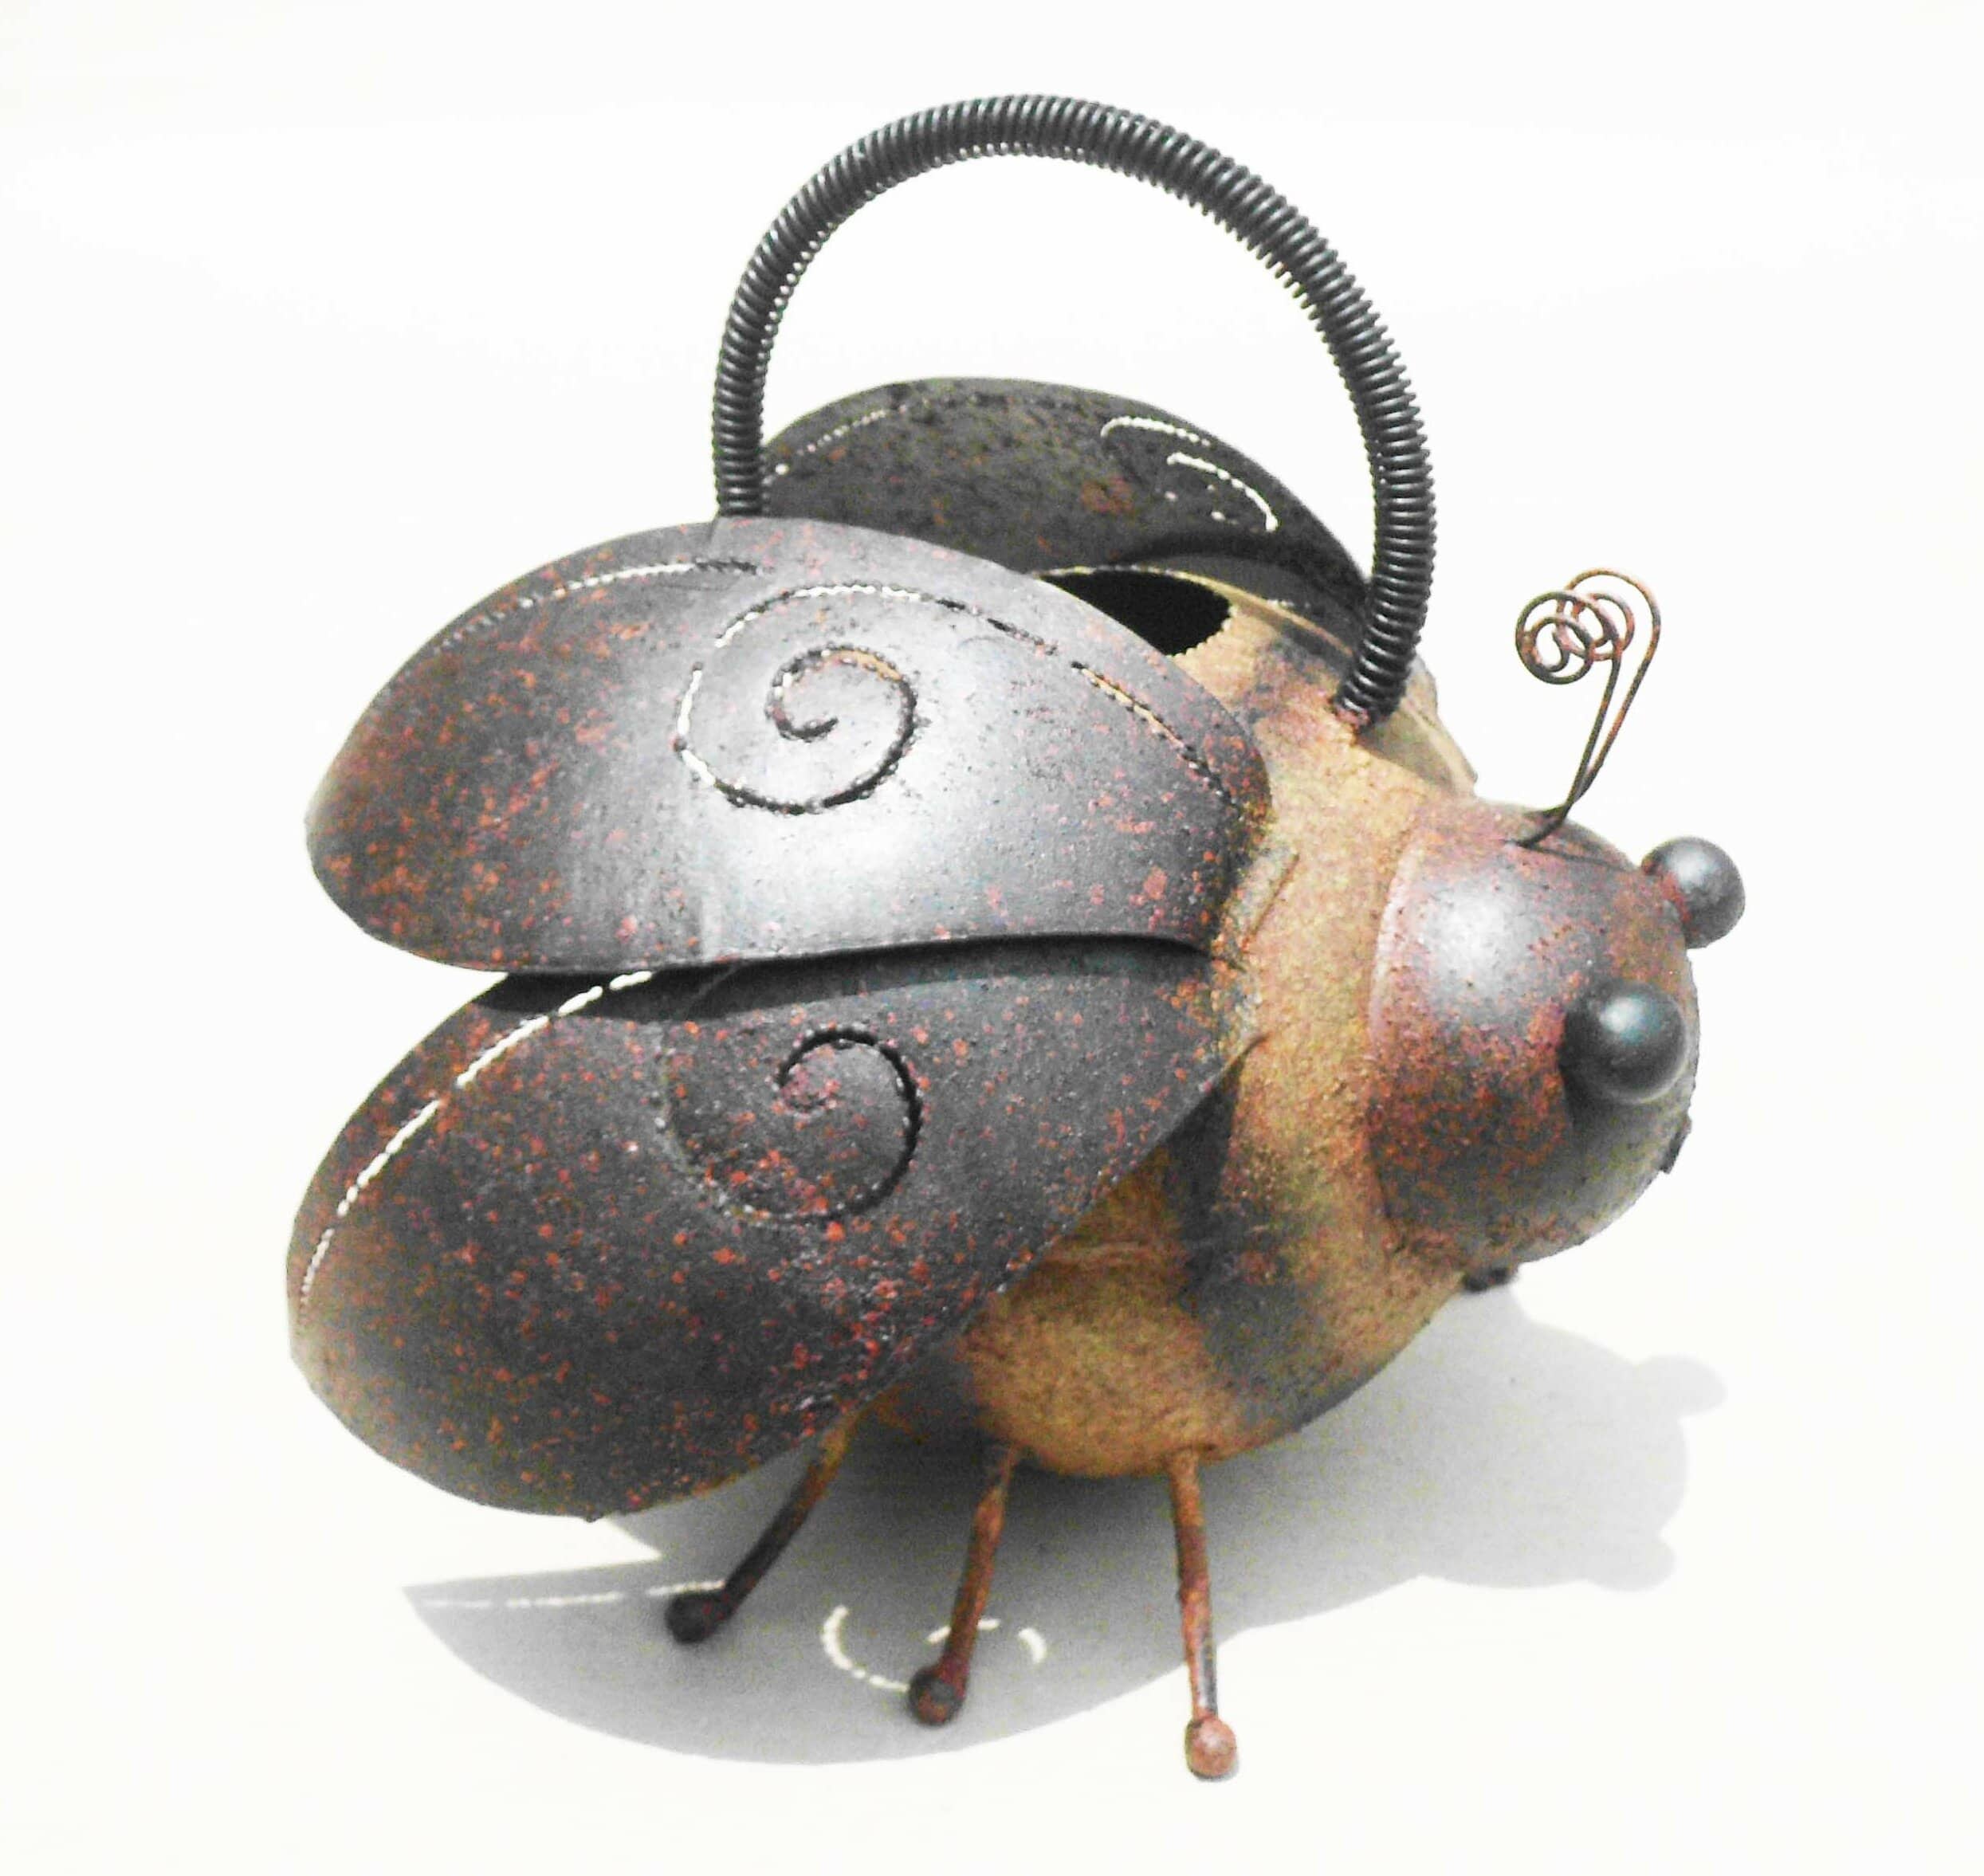 Decorative Metal Bumble Bee Garden Accents - Lawn Ornaments - Set of 4